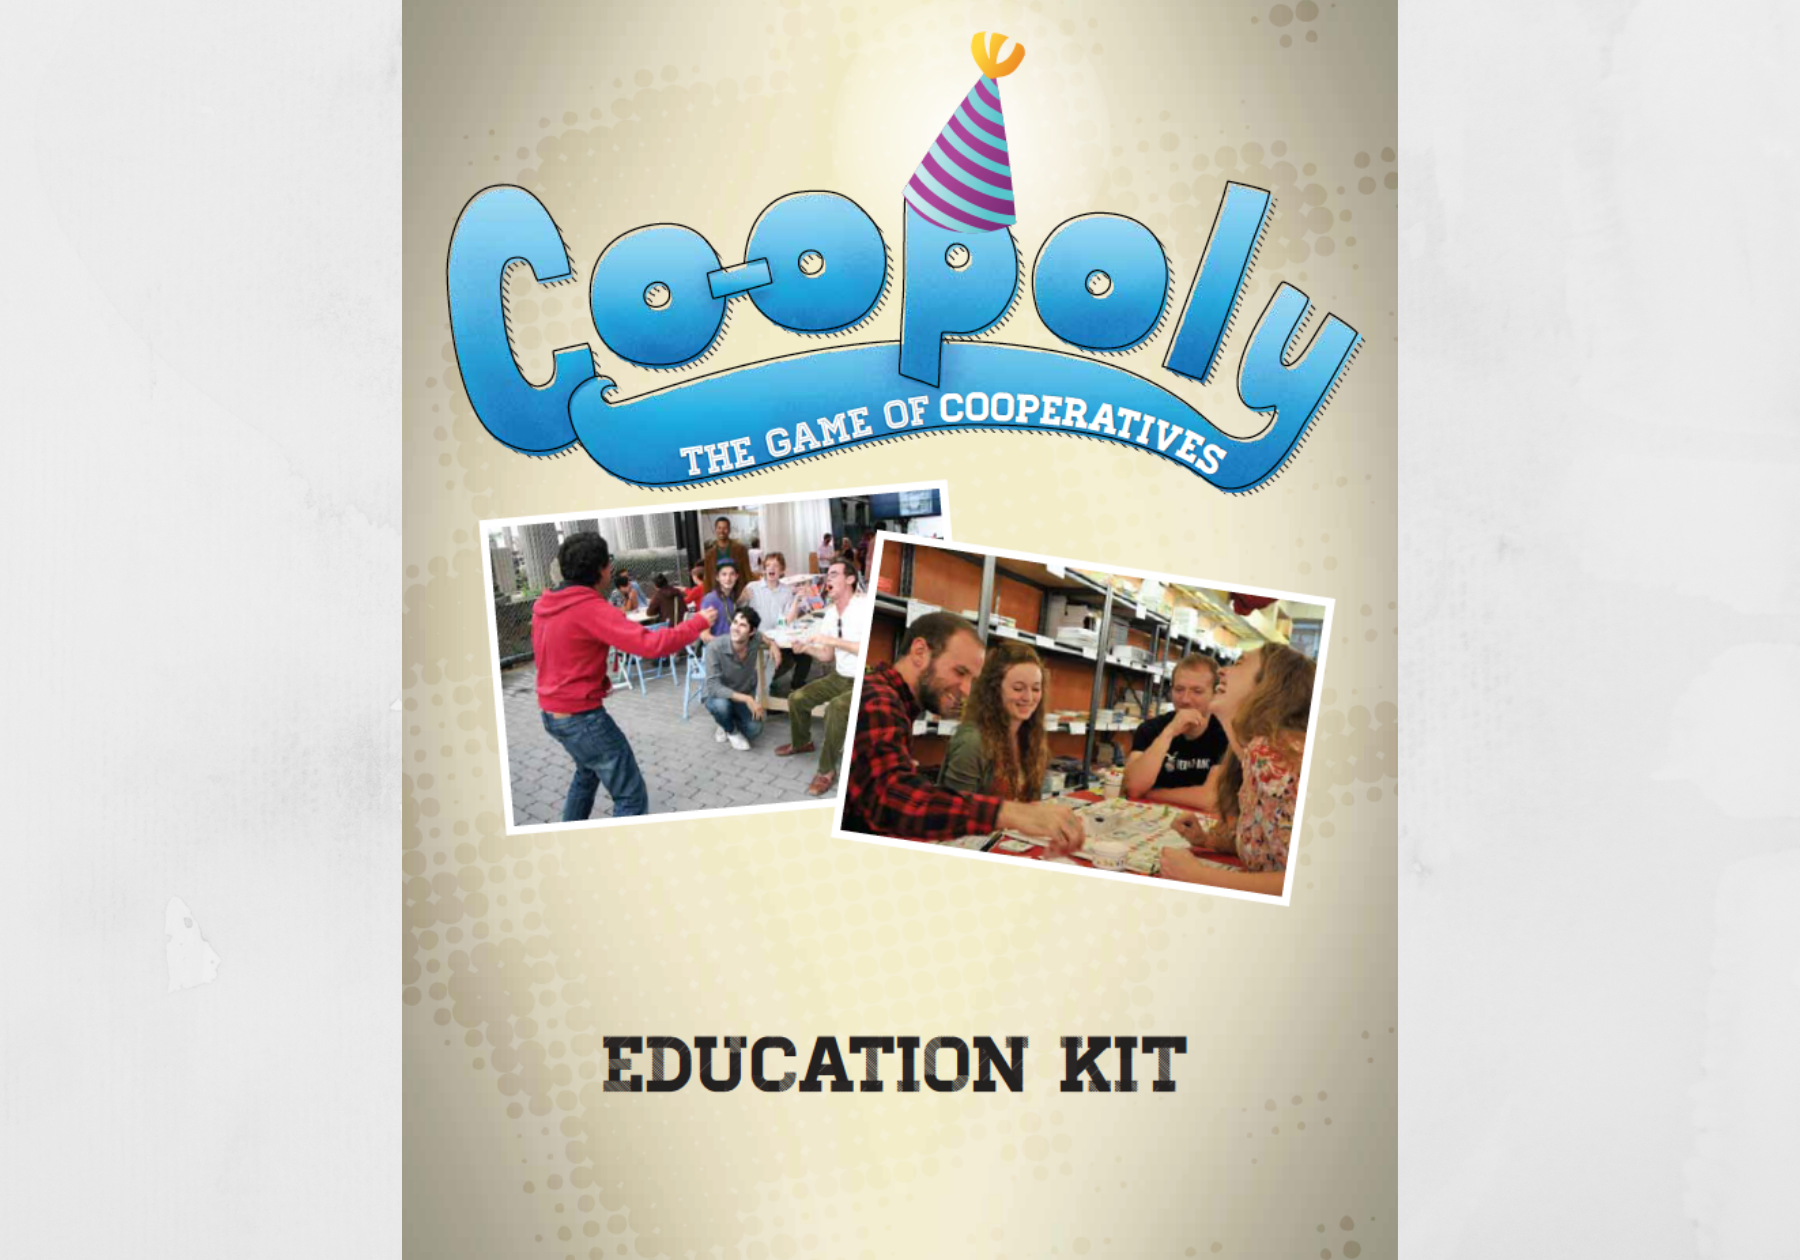 Co-opoly Education Kit